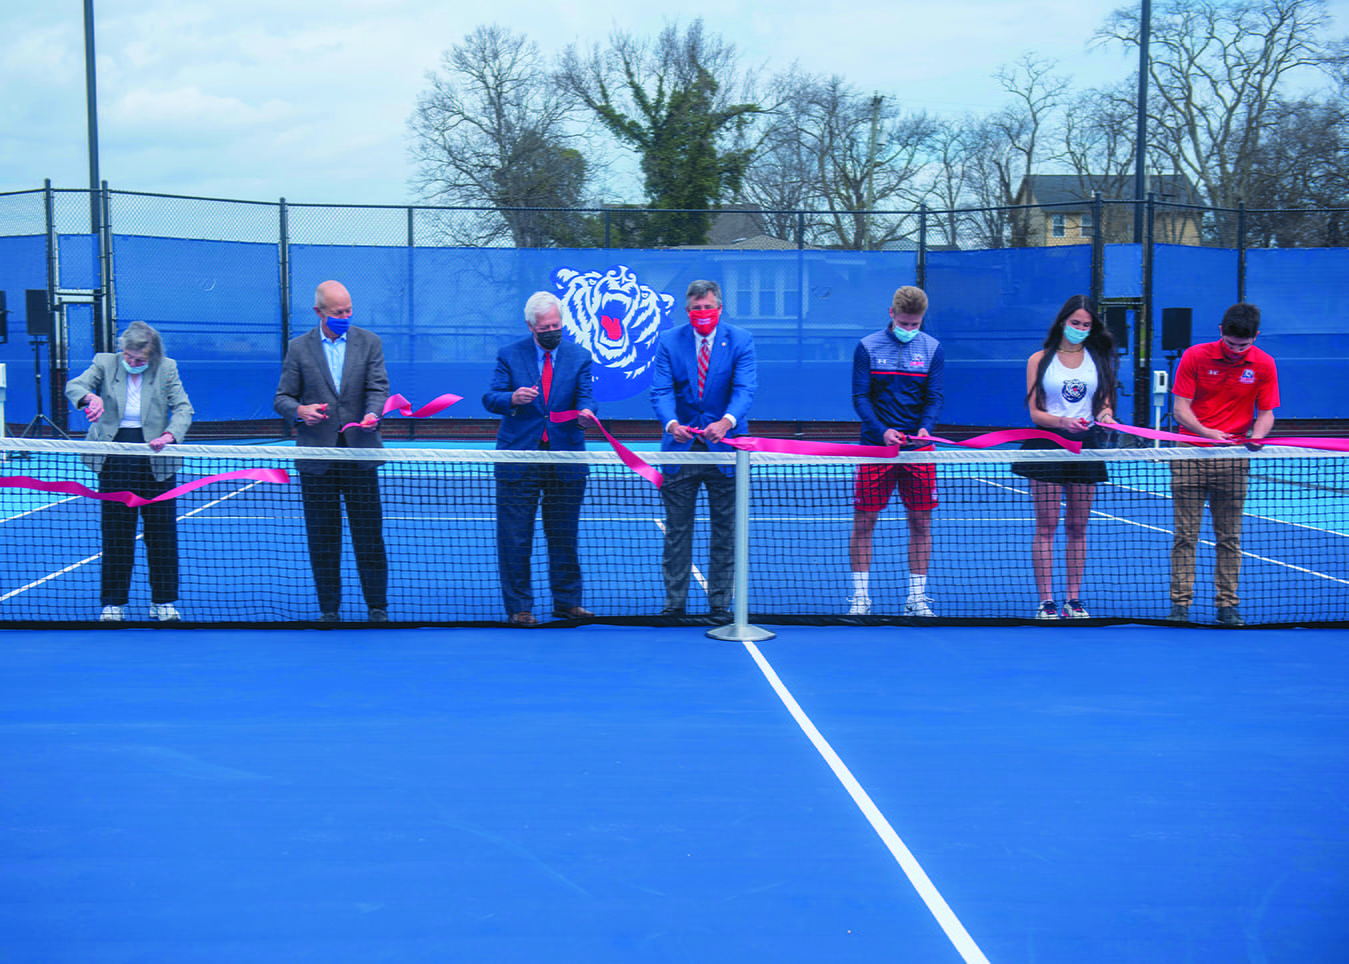 Pat Johnson, Bill DeLoache, Dr. Fisher, Scott Corley, Marko Illic, Somer Henry and Mauricio Antun cut the ribbon during the ceremony opening Belmont's new rooftop tennis facility at Belmont University in Nashville, Tennessee, March 10, 2021. 